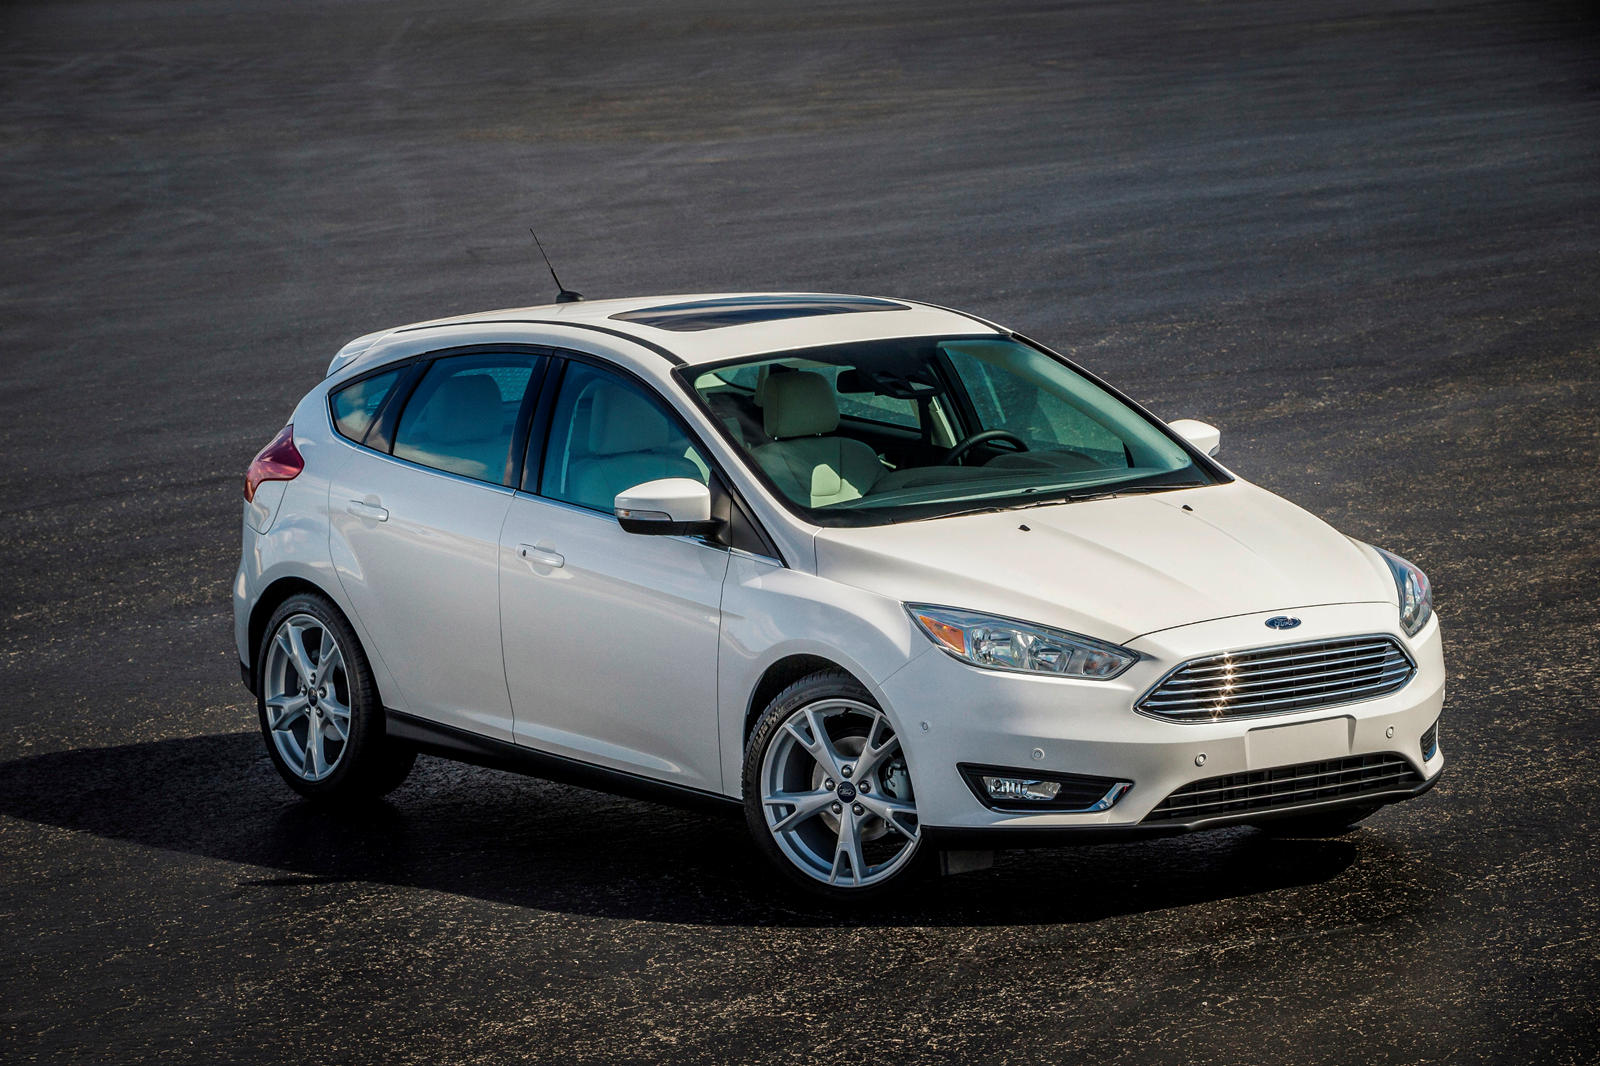 2018 Ford Focus Hatchback: Review, Trims, Specs, Price, New